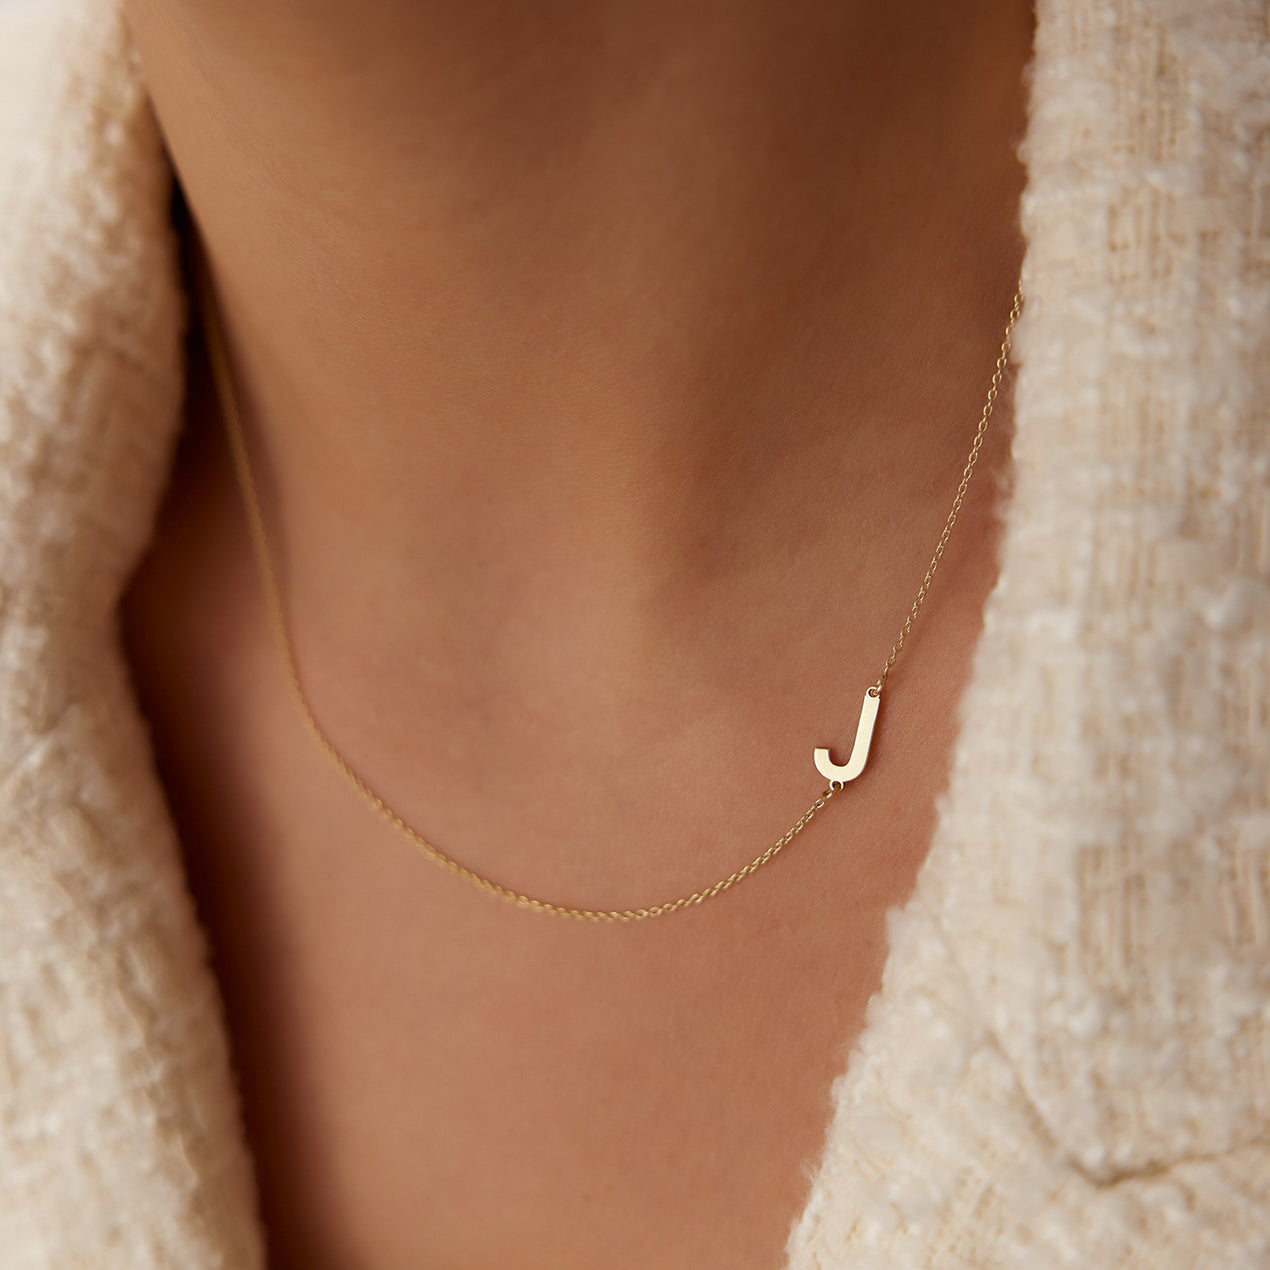 diamond and 14k initial J necklace – Twigs